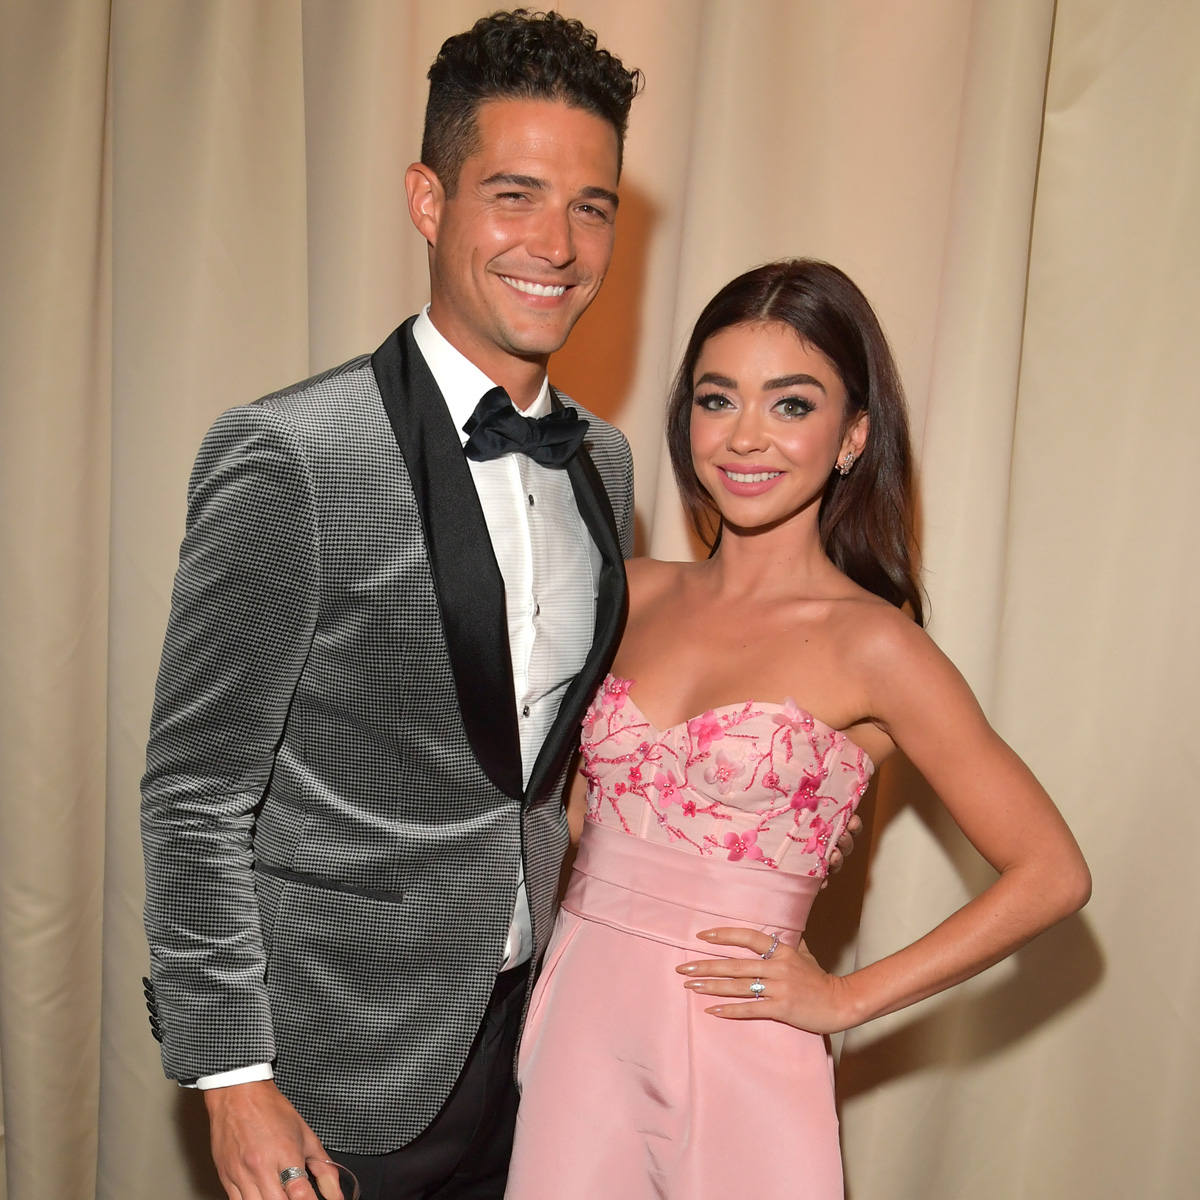 Why Wells Adams Says Wedding to Sarah Hyland Will Be “Off the Wall”